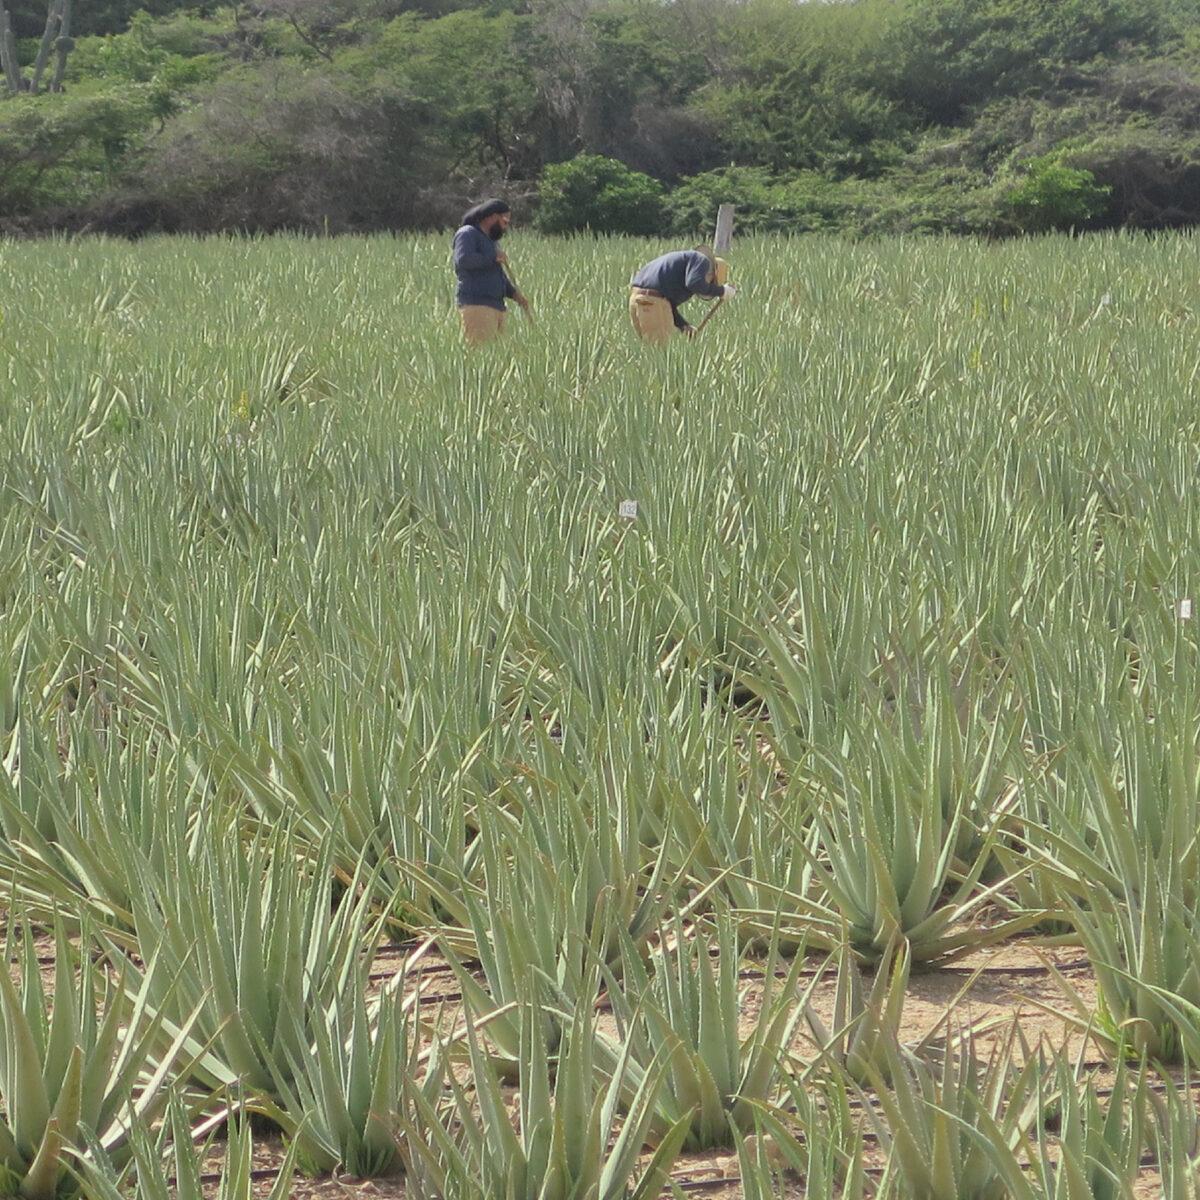 Workers at the Aloe Museum and Factory in Aruba use machetes to harvest aloe. (Victor Block)